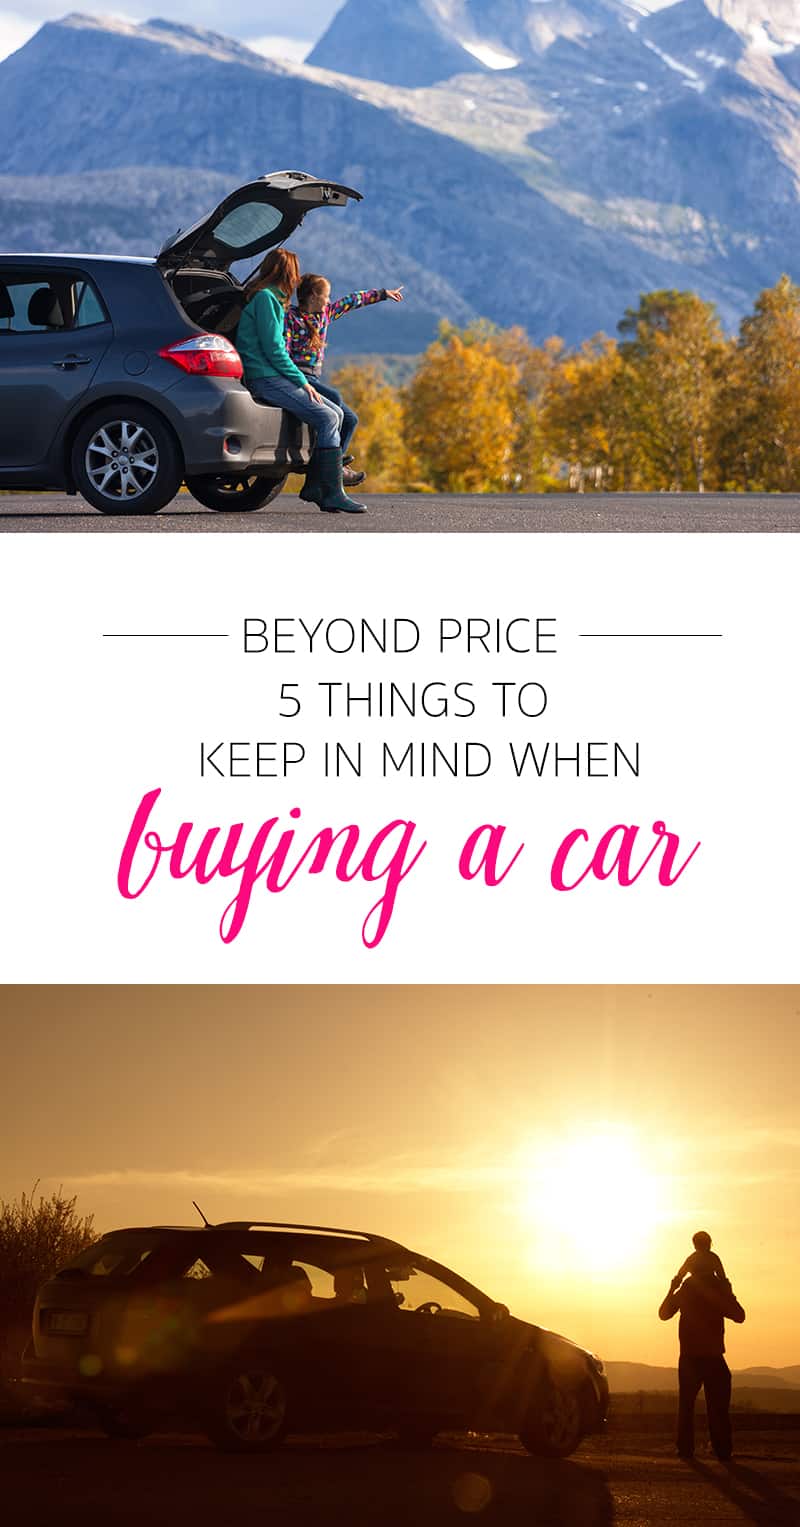 Beyond Price: 5 Things to Keep in Mind When Buying a Car for Your Family *Wether you're buying new or used, this is a great read